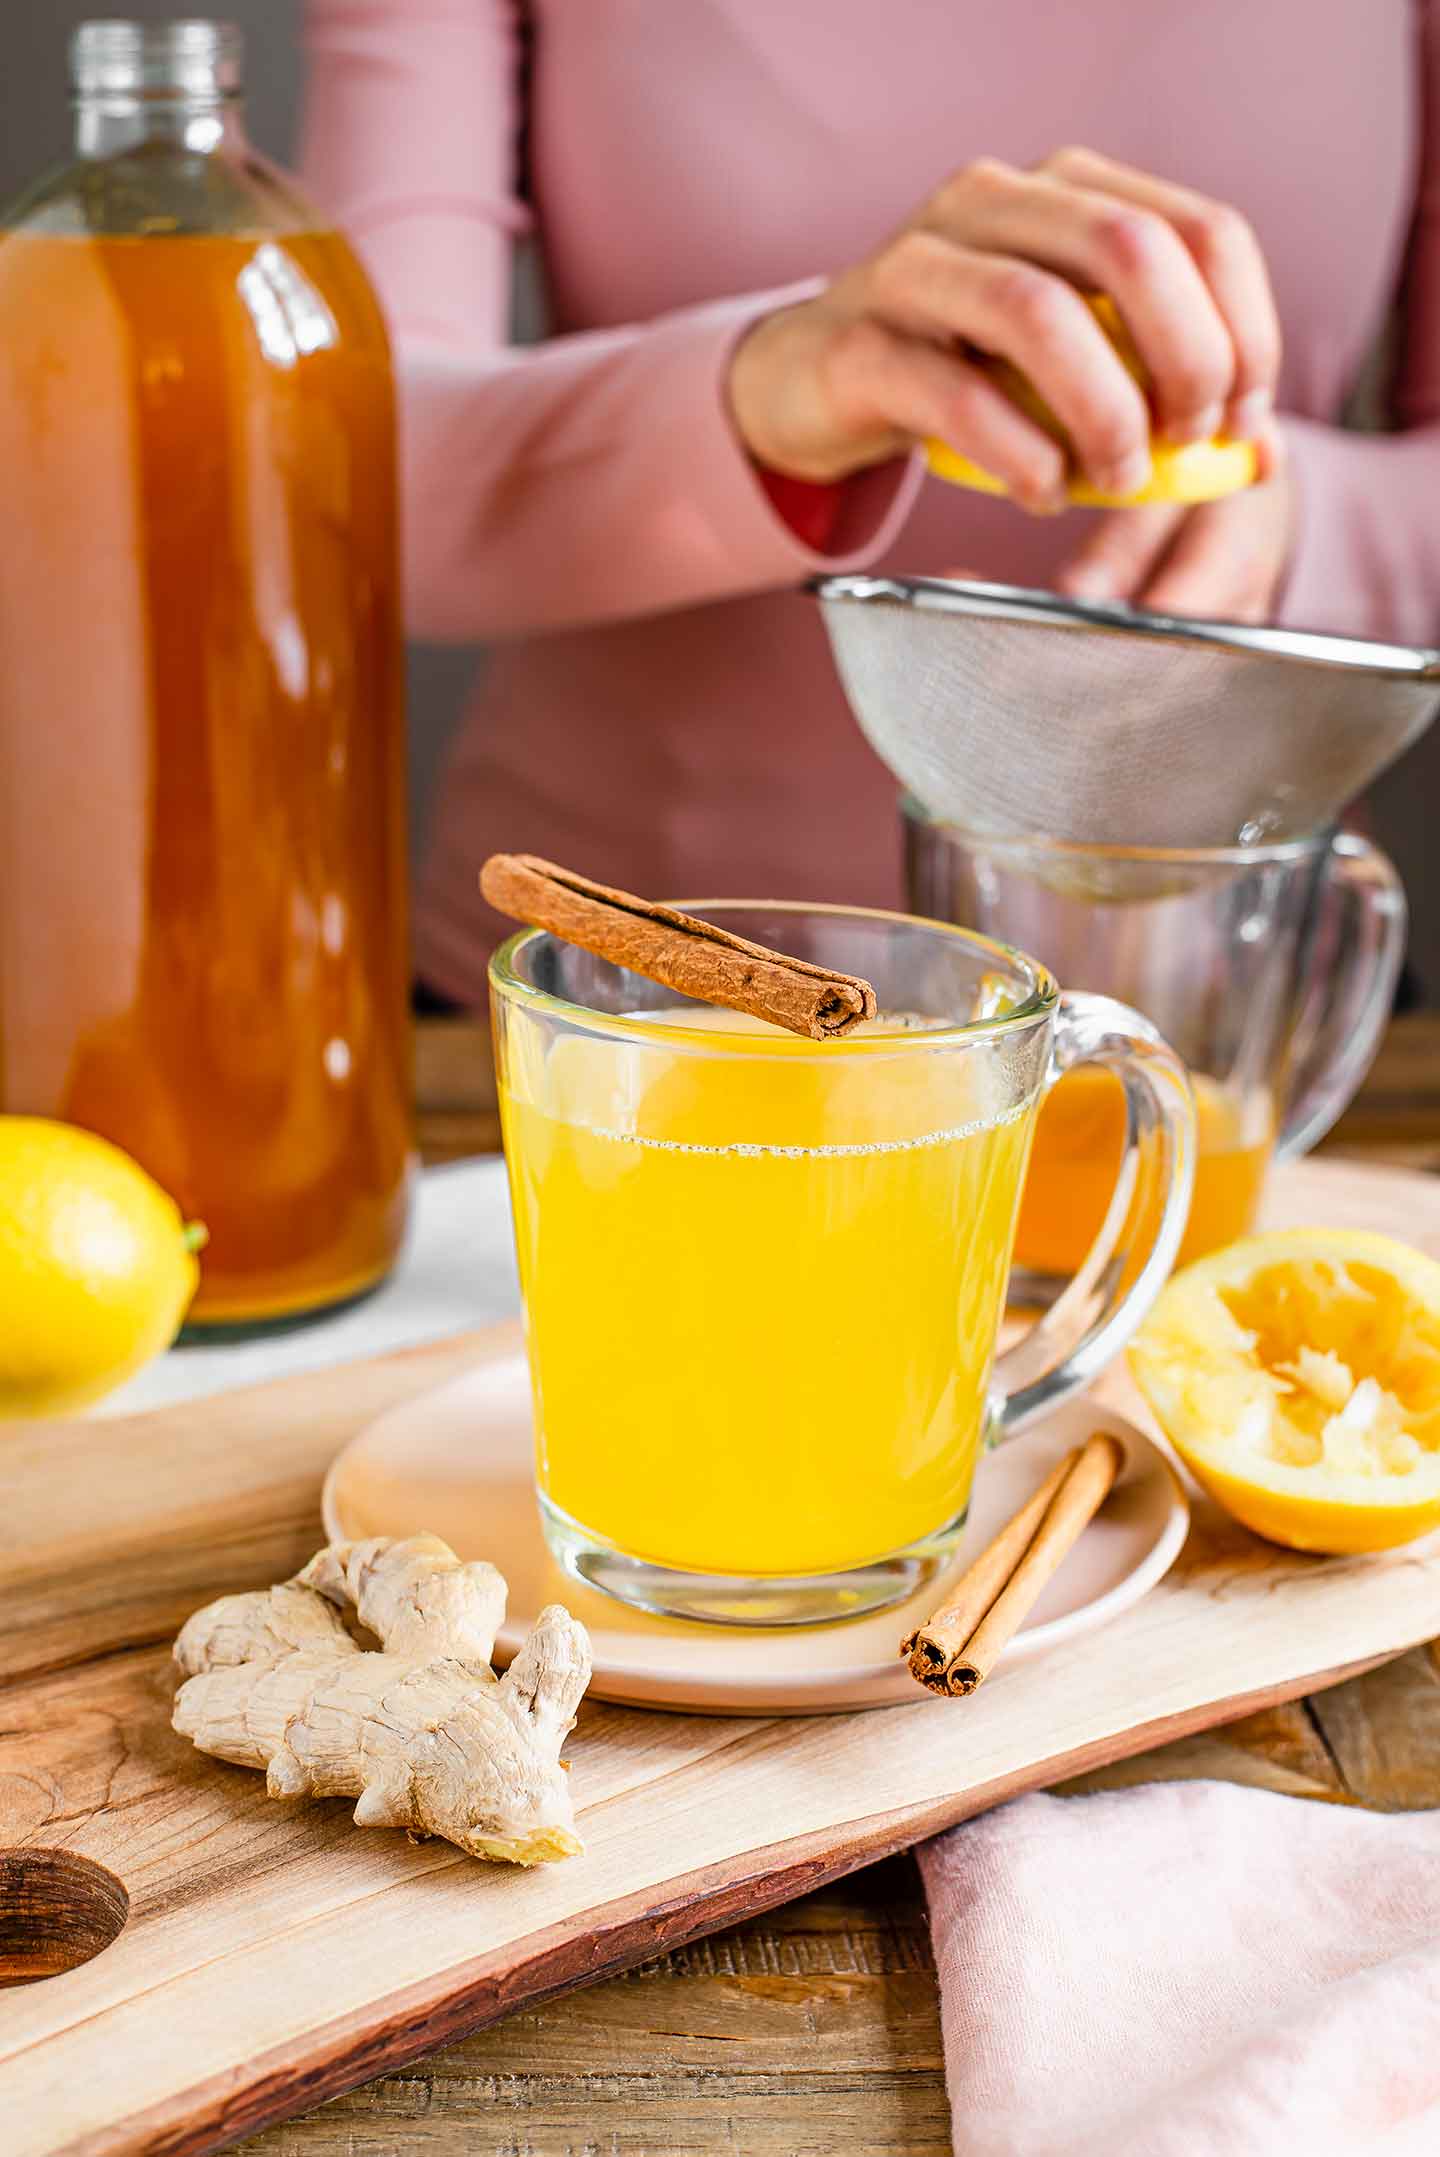 Side view of a mug of tea in the foreground with a large glass bottle of a darker concentrate in the background. A woman squeezes lemon juice through a strainer into a mug with a small portion of the concentrate.